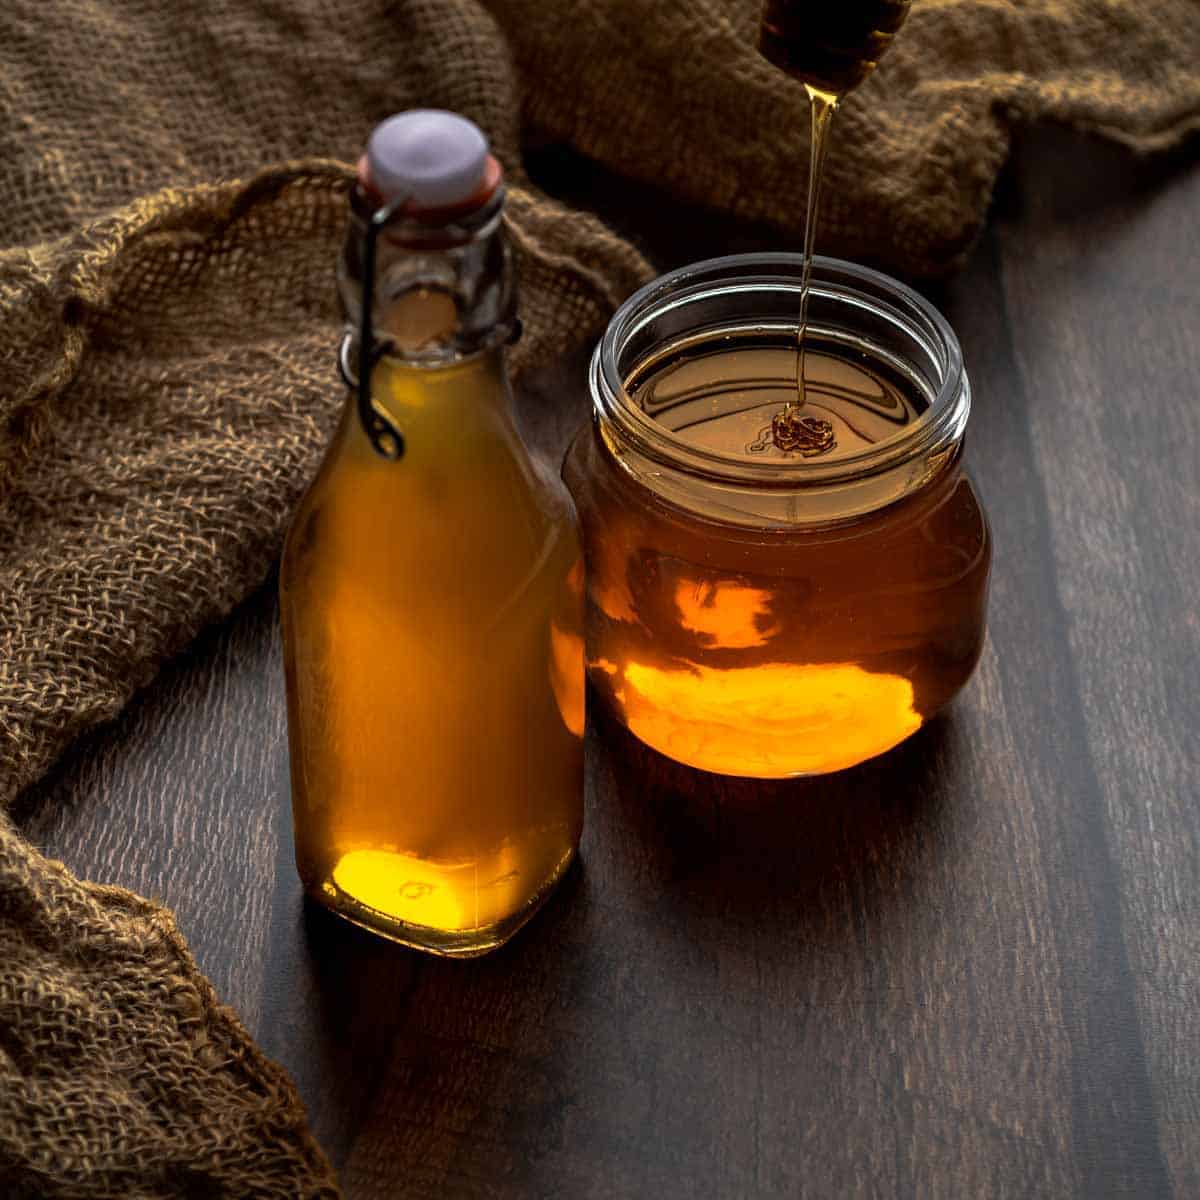 A bottle of honey syrup and honey dripping into a jar